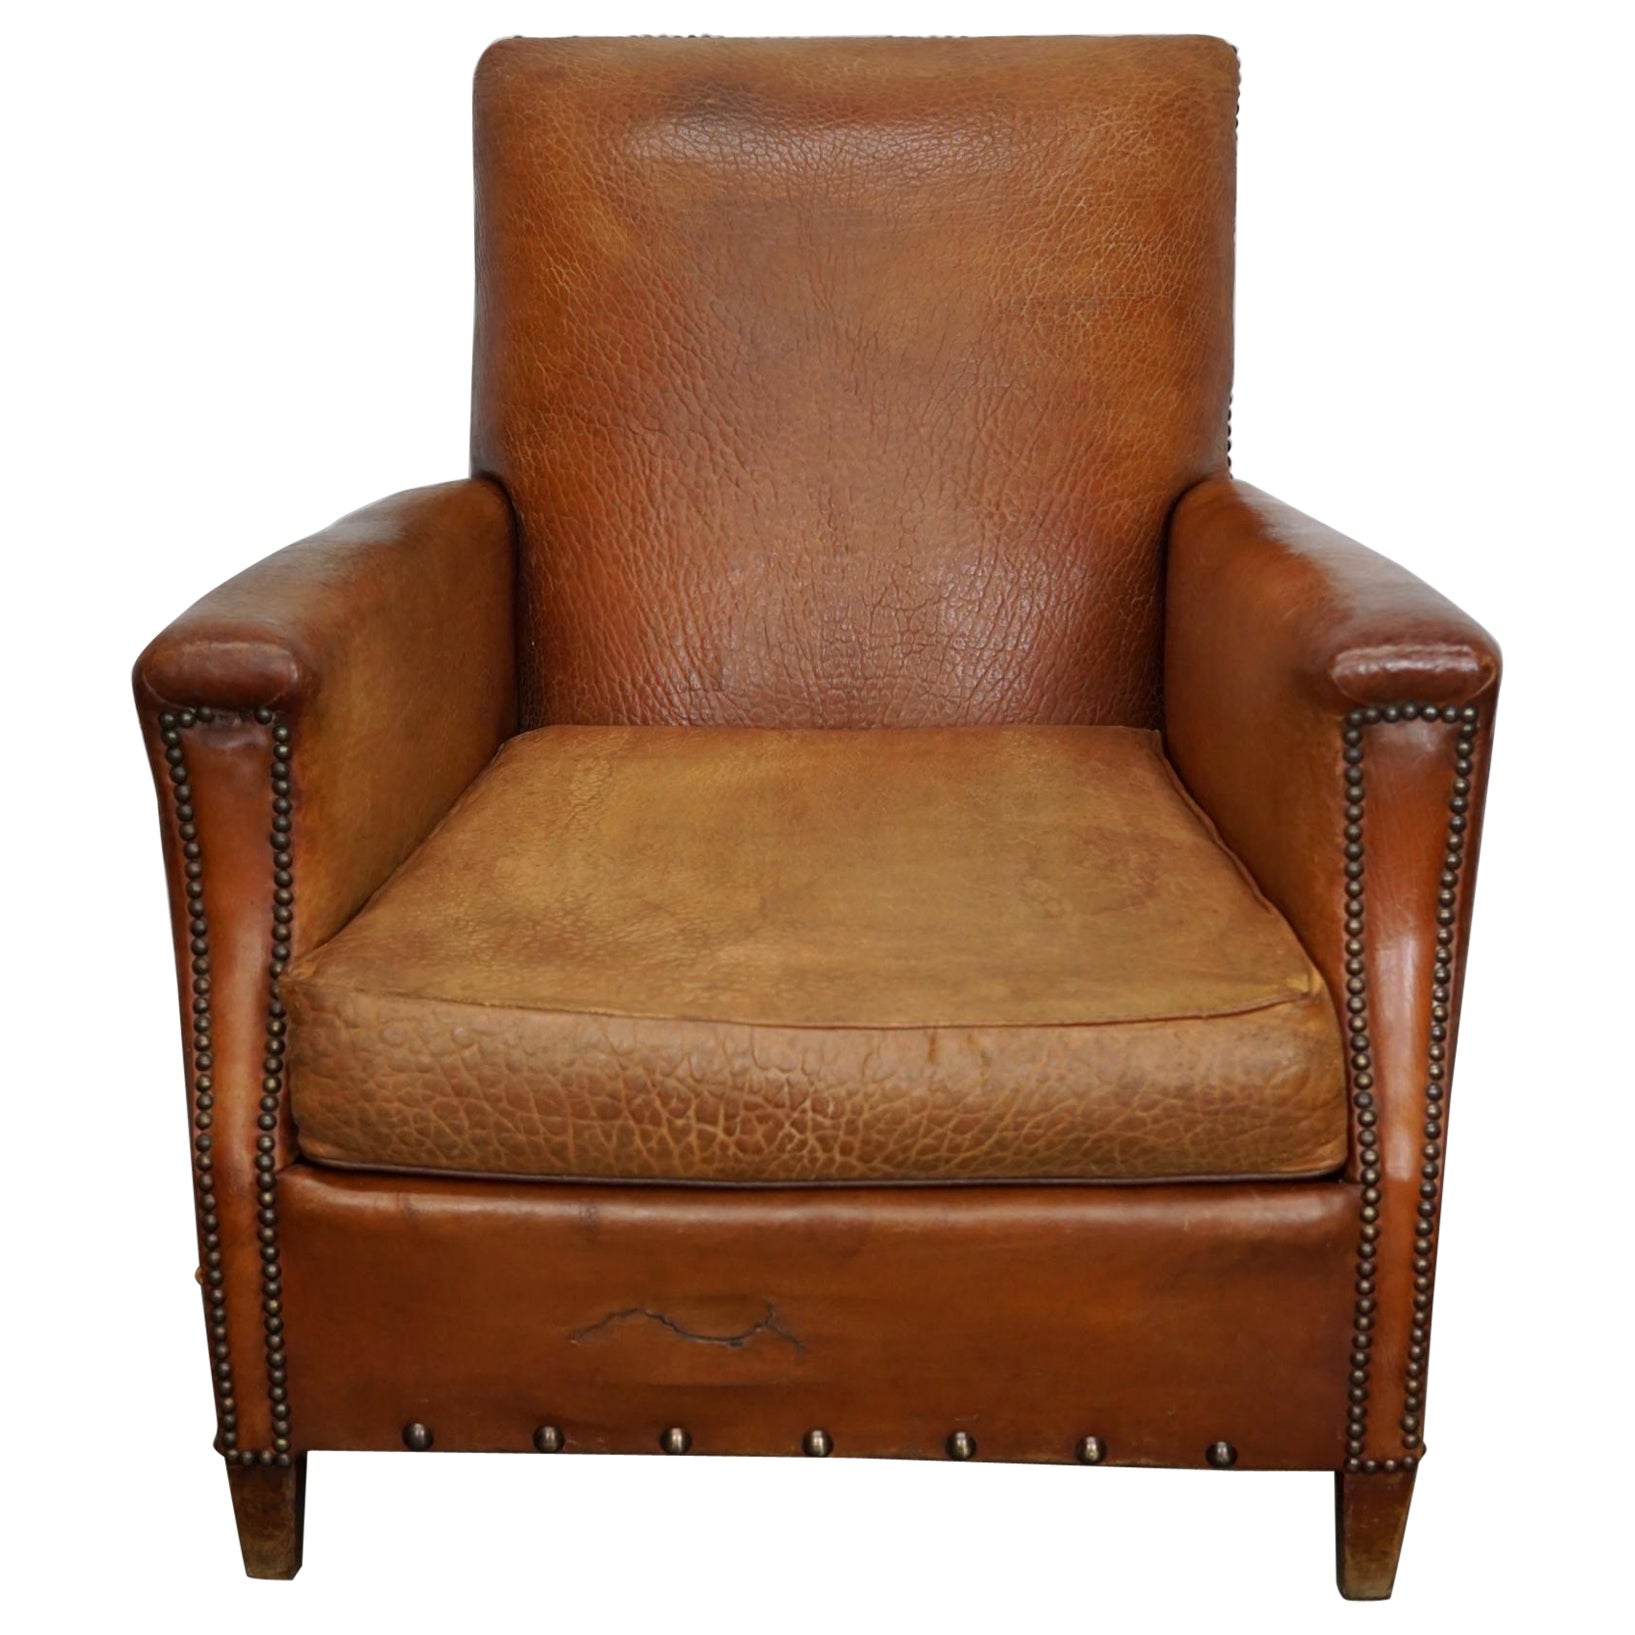 Vintage French Cognac-Colored Leather Club Chair, 1940s For Sale